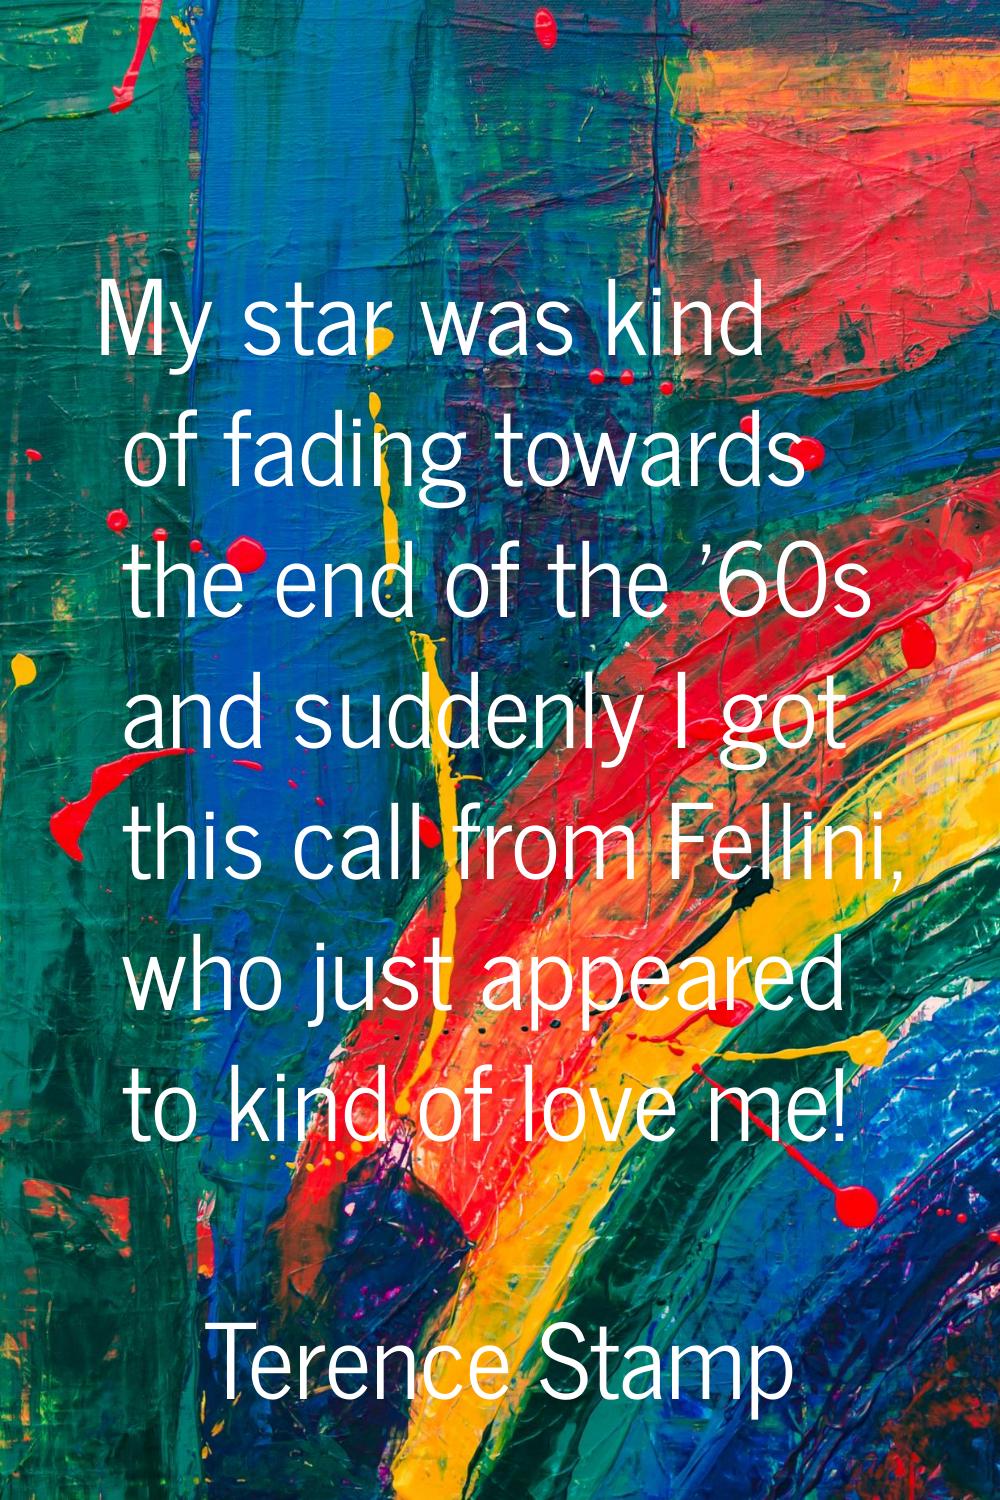 My star was kind of fading towards the end of the '60s and suddenly I got this call from Fellini, w